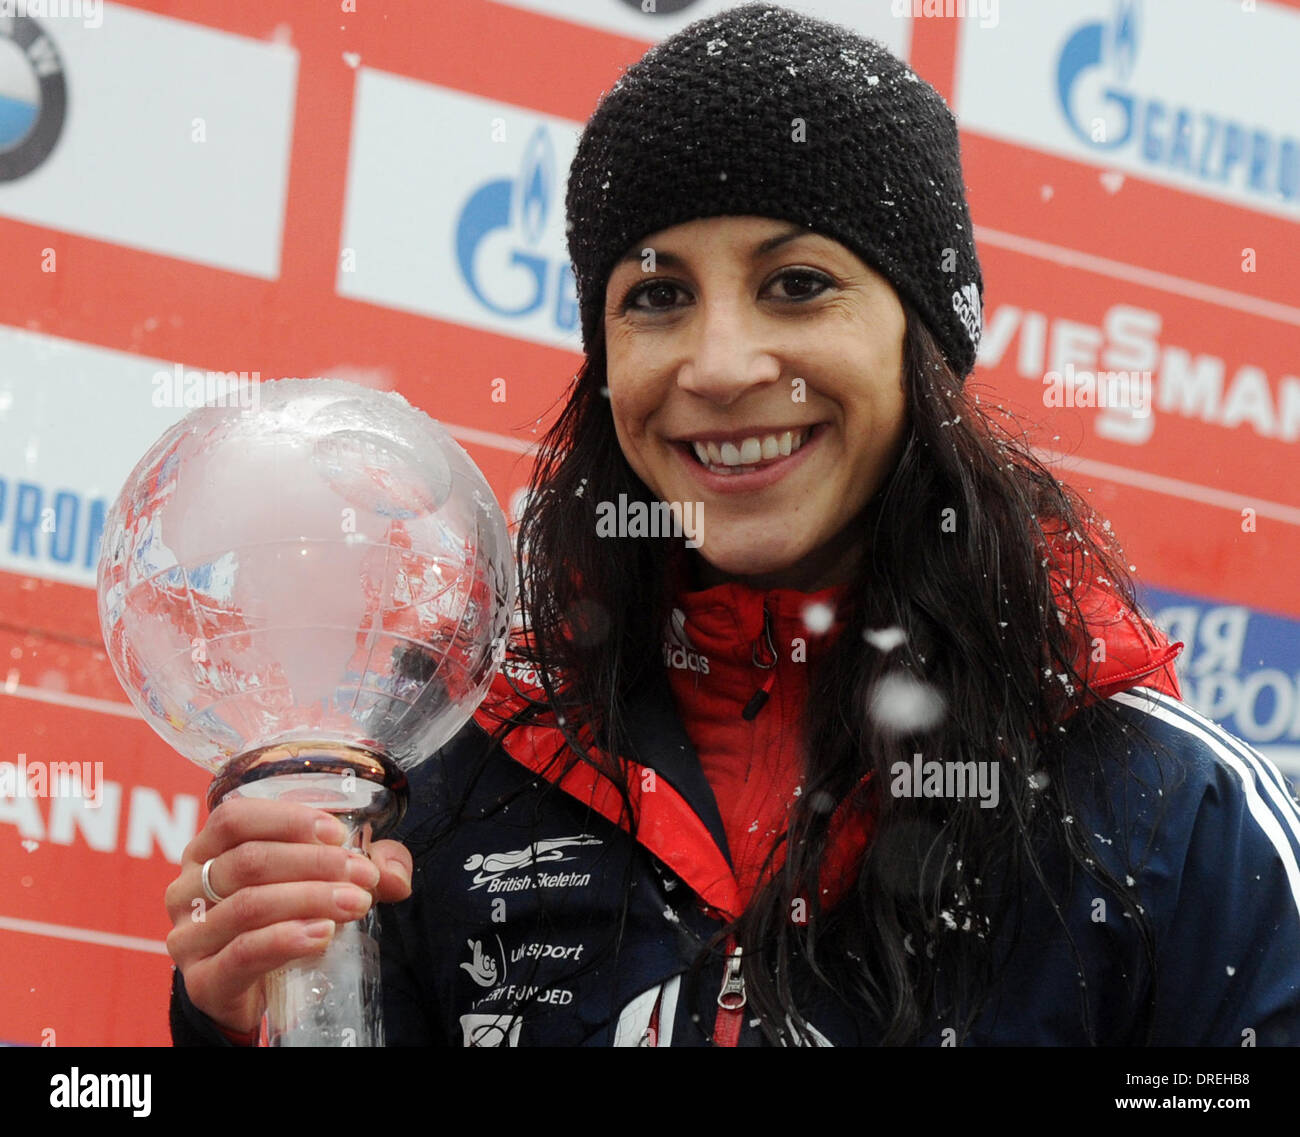 Berchtesgaden, Germany. 24th Jan, 2014. British skeleton driver Shelley Rudman holds her trophy after the skeleton world cup at Koenigssee near Berchtesgaden, Germany, 24 January 2014. Rudman came in third during the race and third for the overall World Cup. Photo: TOBIAS HASE/dpa/Alamy Live News Stock Photo